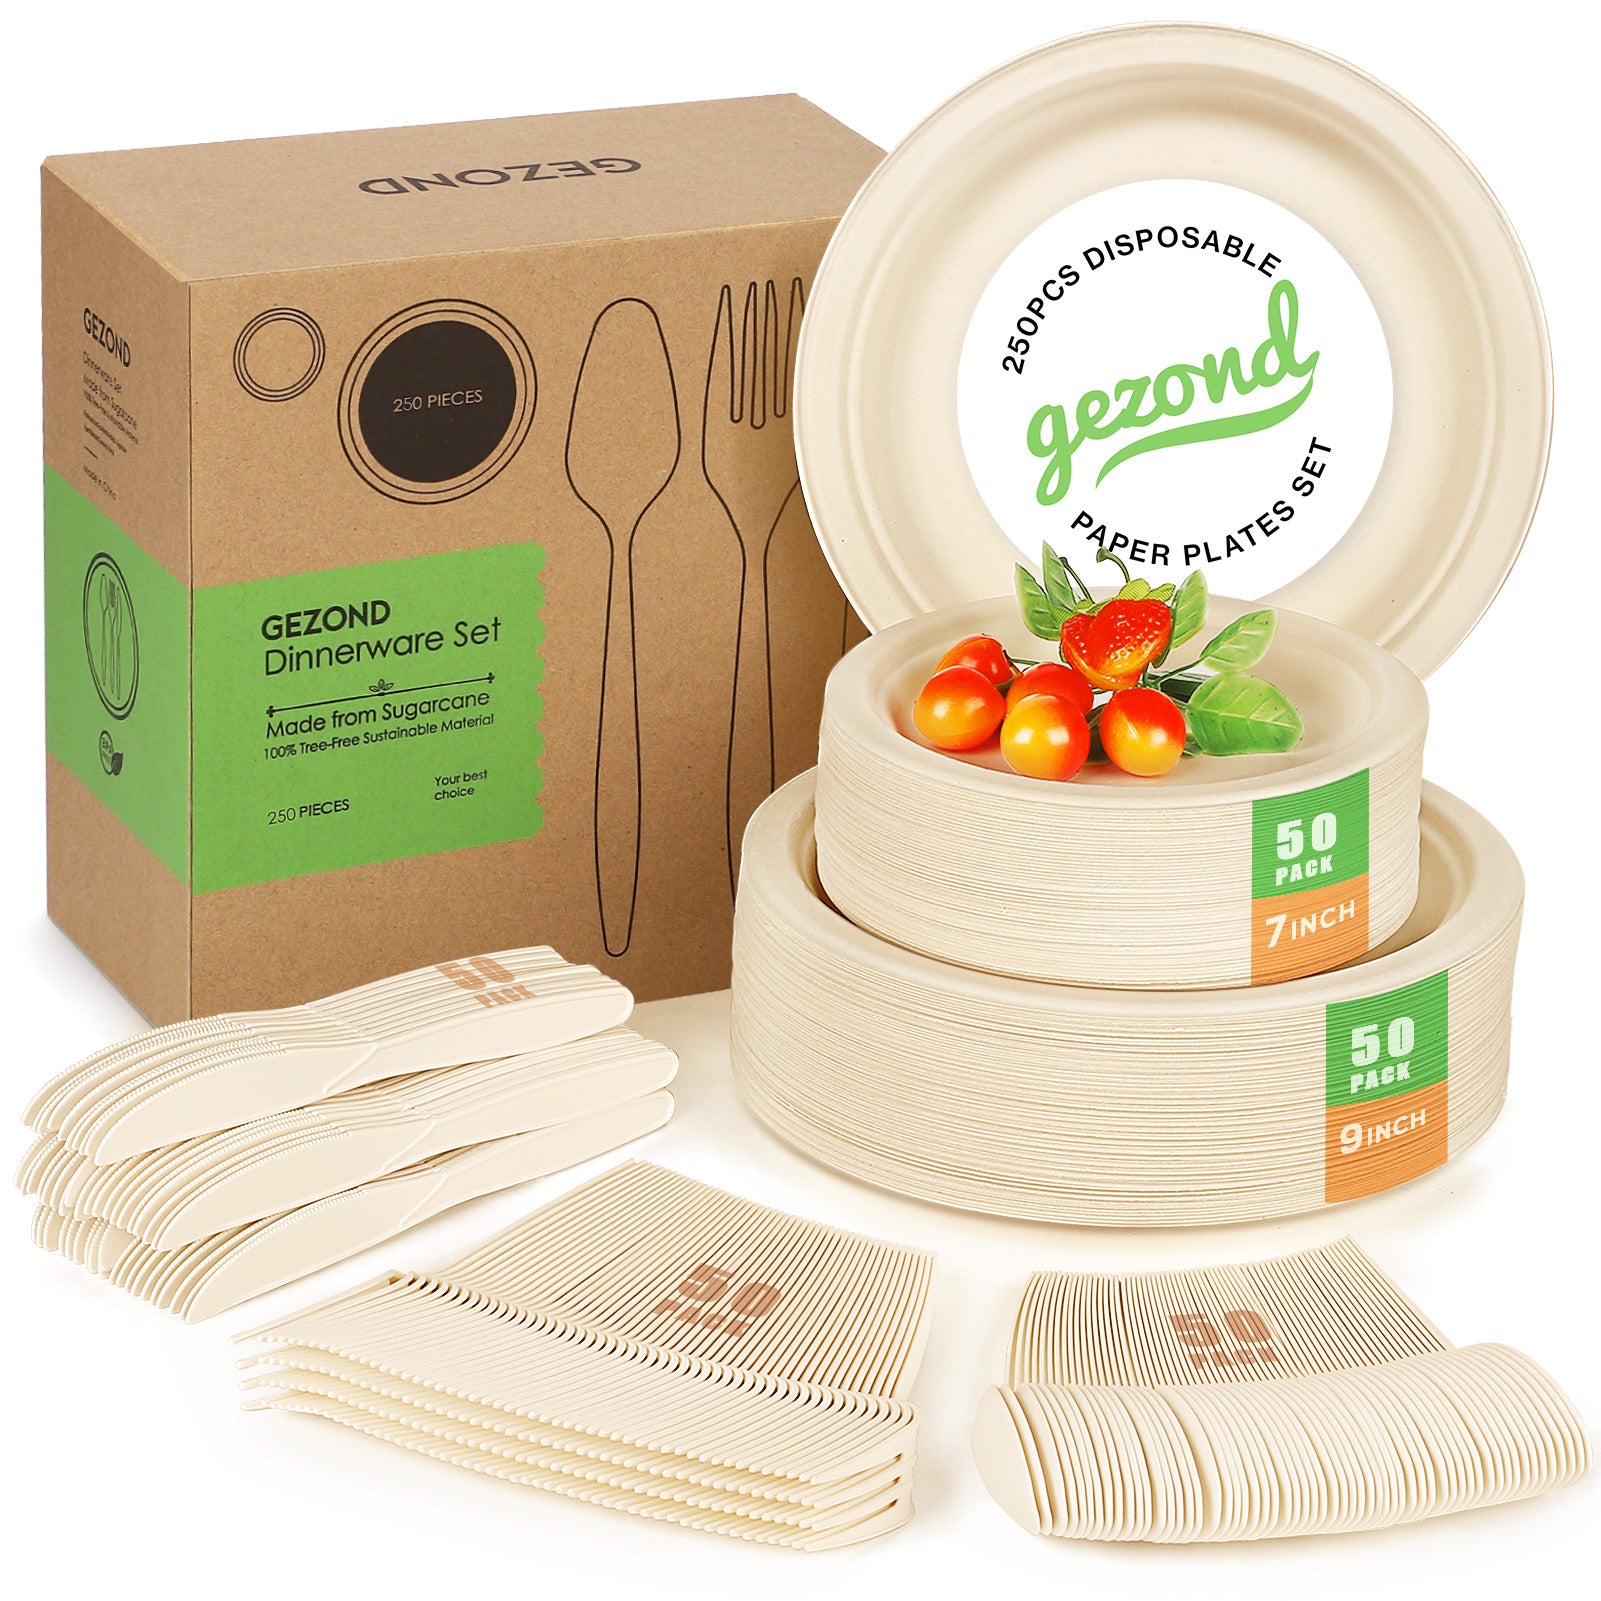 100% Compostable Disposable Paper Plates Bulk [6 50 Pack], Bamboo Plates,  Eco Friendly, Biodegradable, Sturdy Small Dessert Party Plates, Heavy-Duty